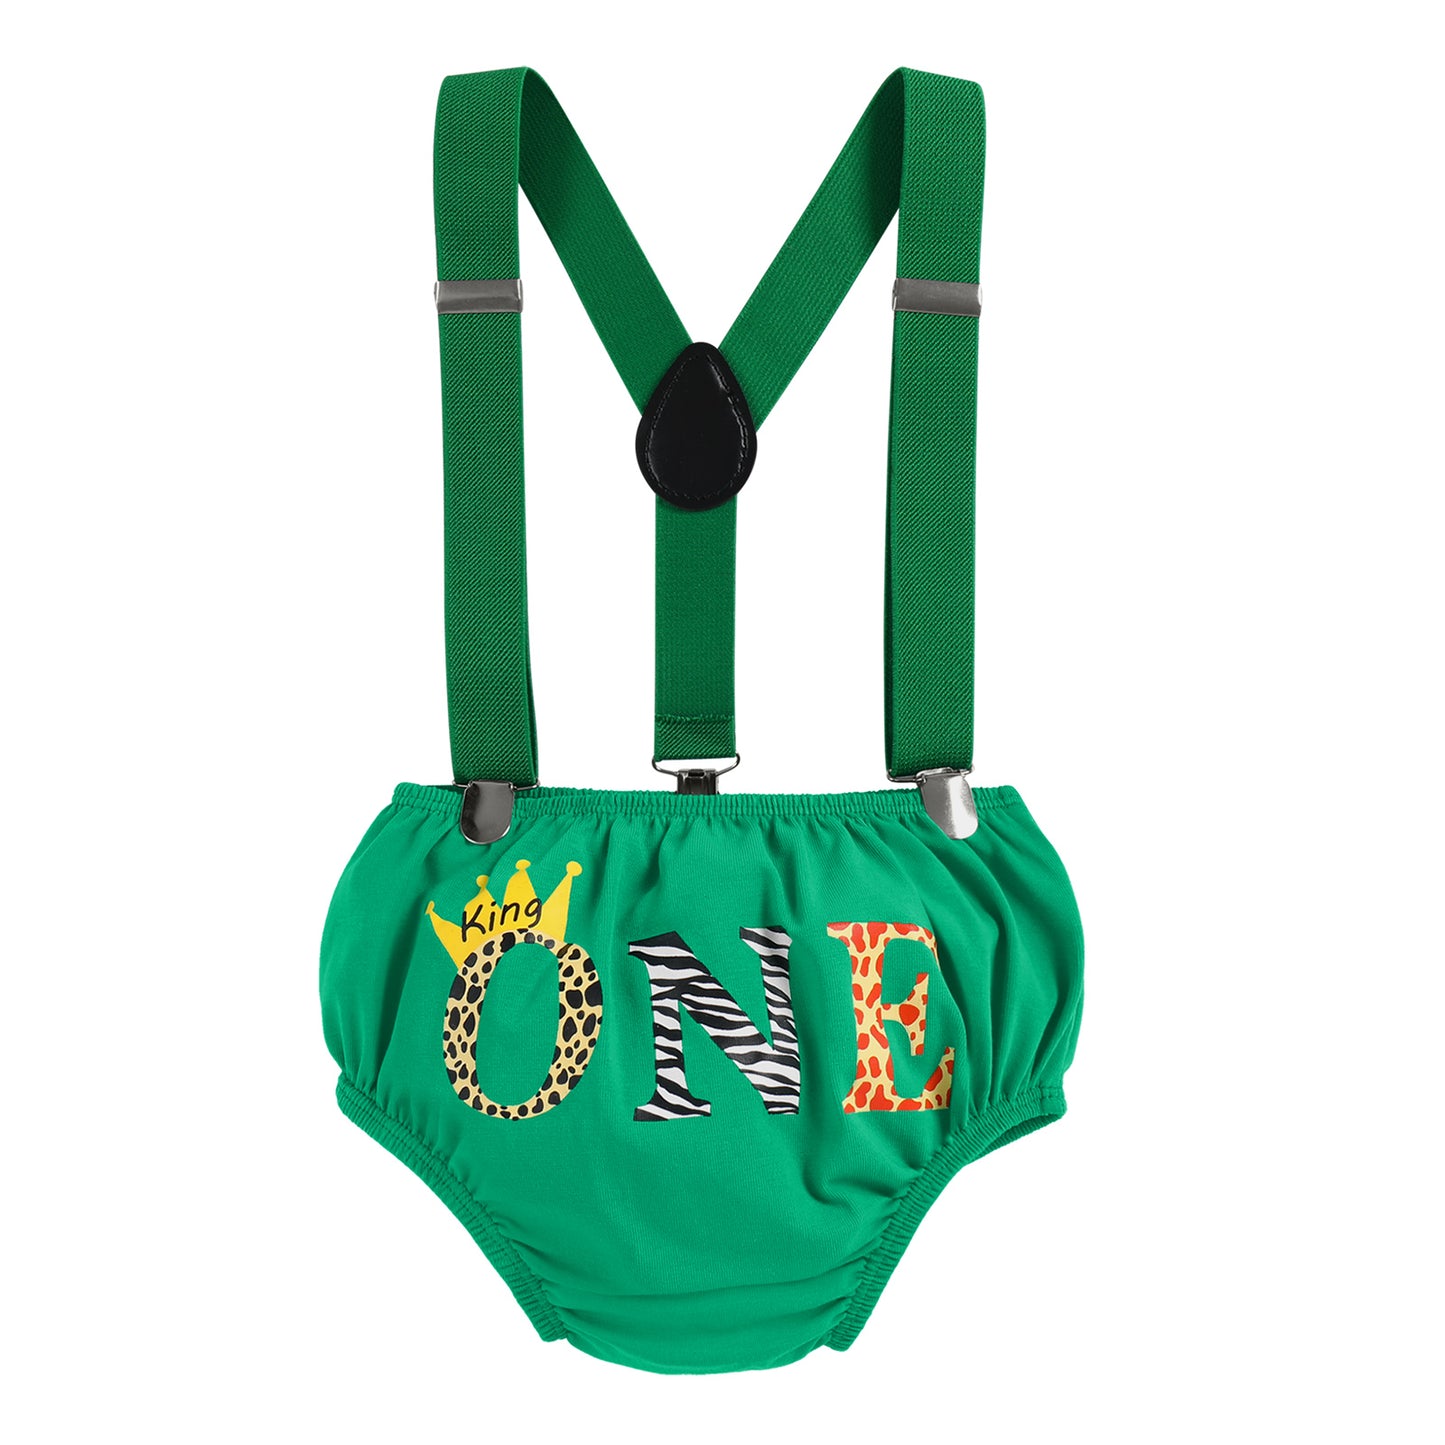 The Big One Birthday Outfit Baby Boys Bowtie Romper Suspenders